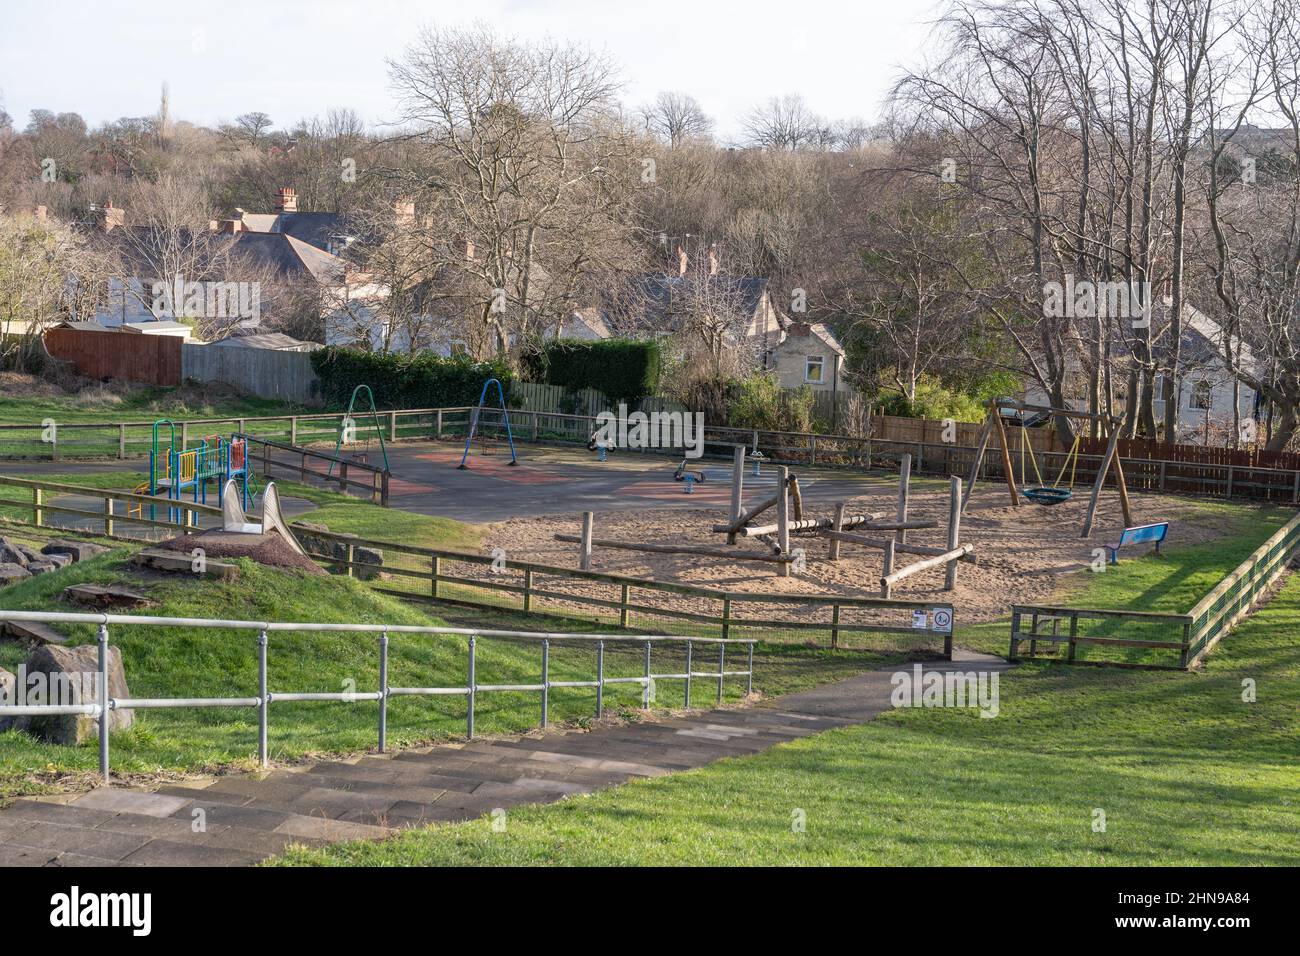 A children's play area with a sand surface in a public park. Stock Photo